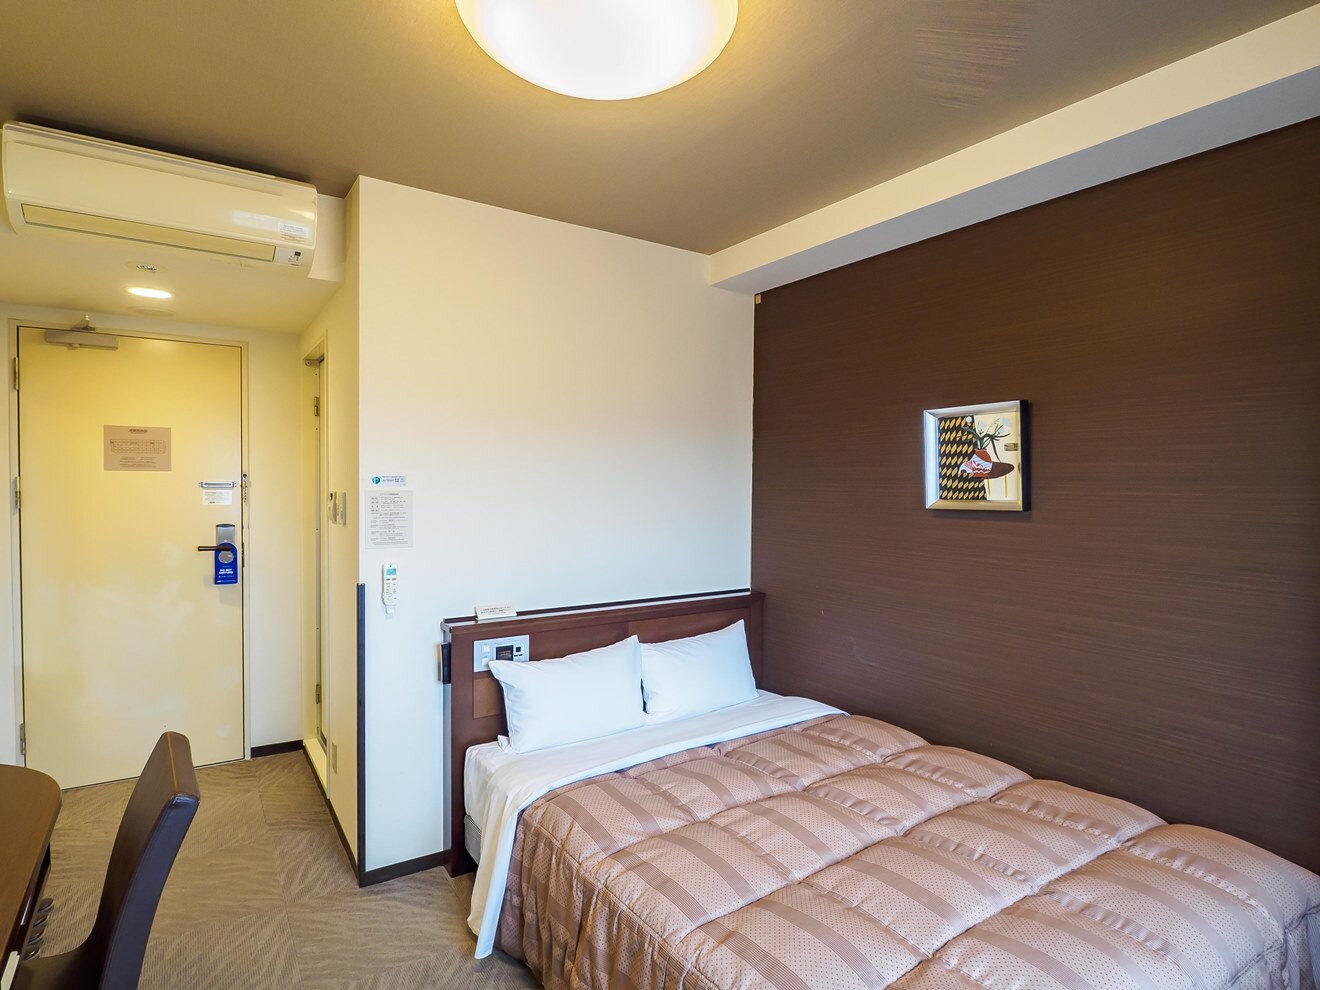 ■ Standard semi-double room ■ Ideal for couples and couples.